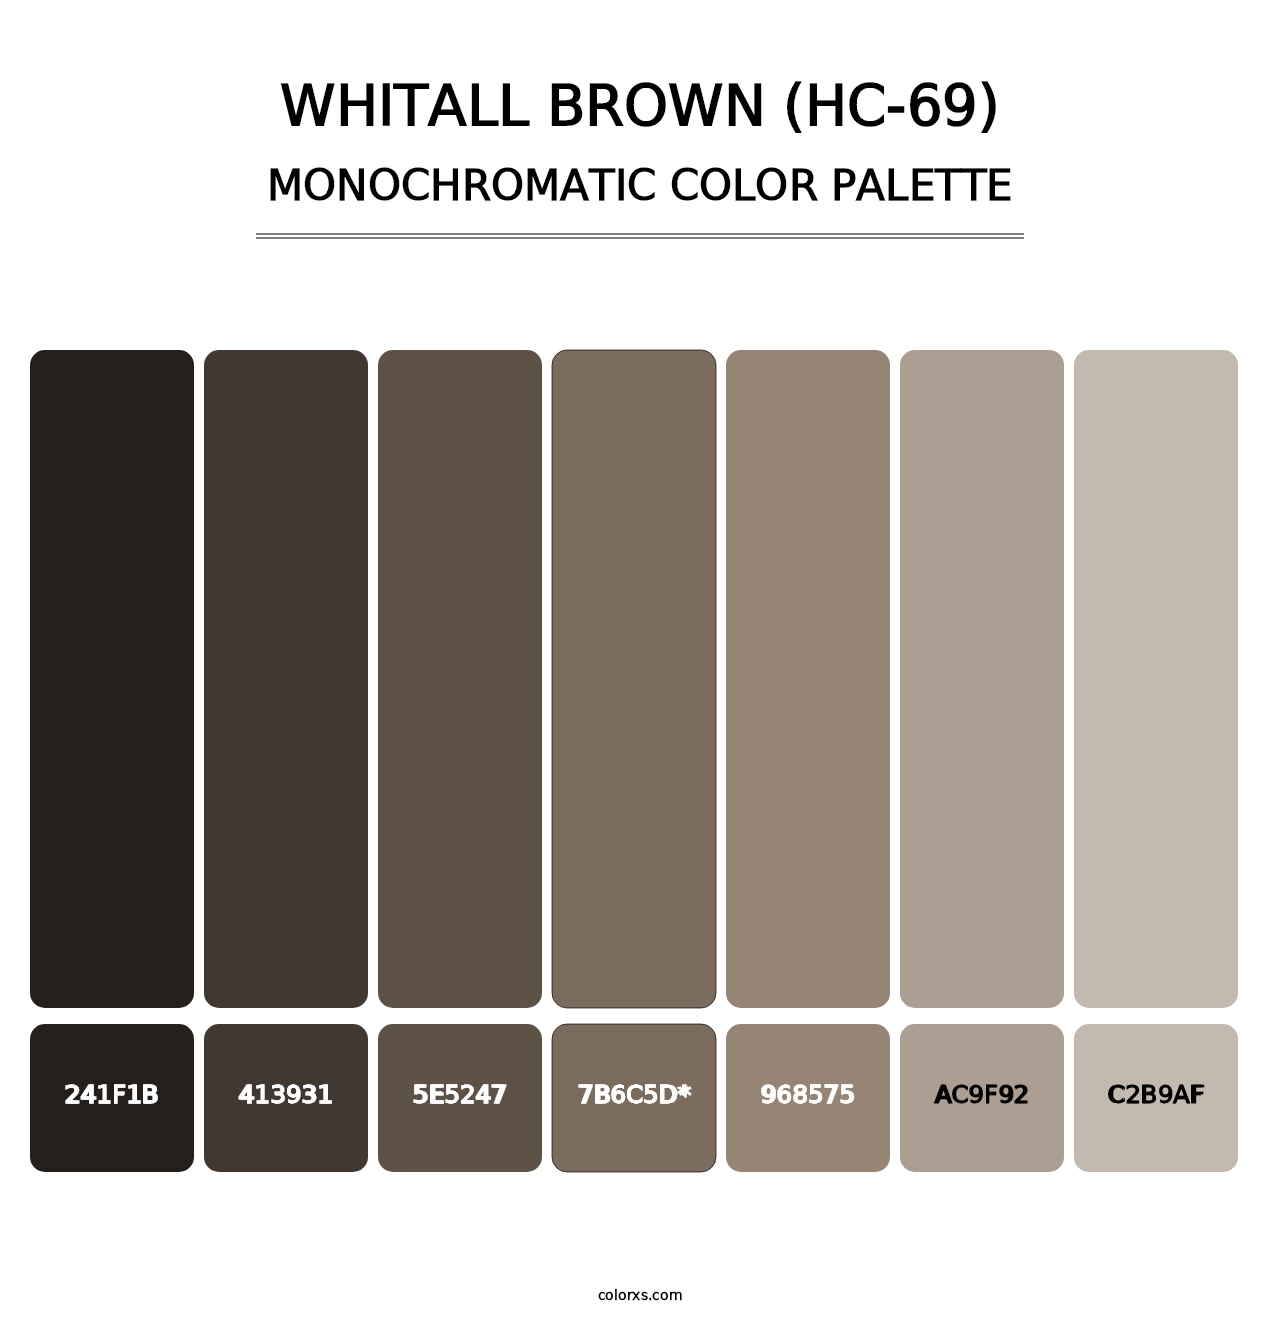 Whitall Brown (HC-69) - Monochromatic Color Palette